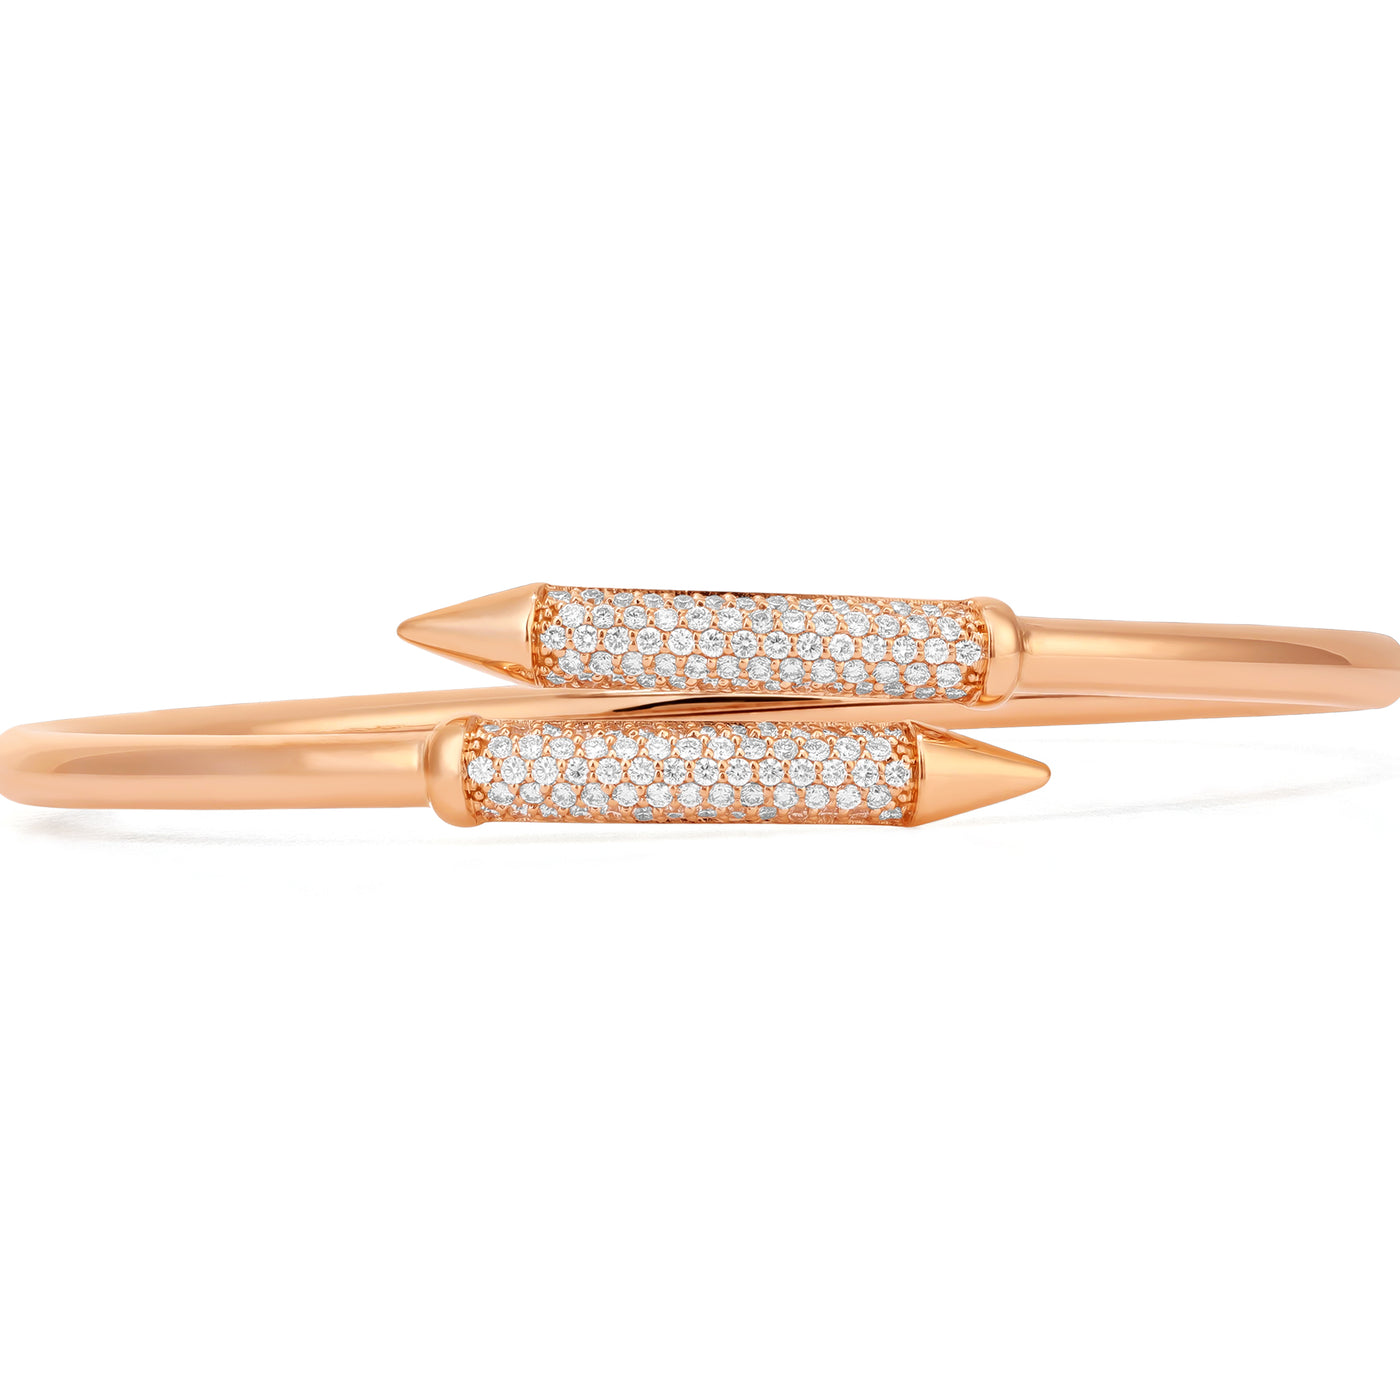 ETOILE Rose gold bangle with round diamond and two head of gold